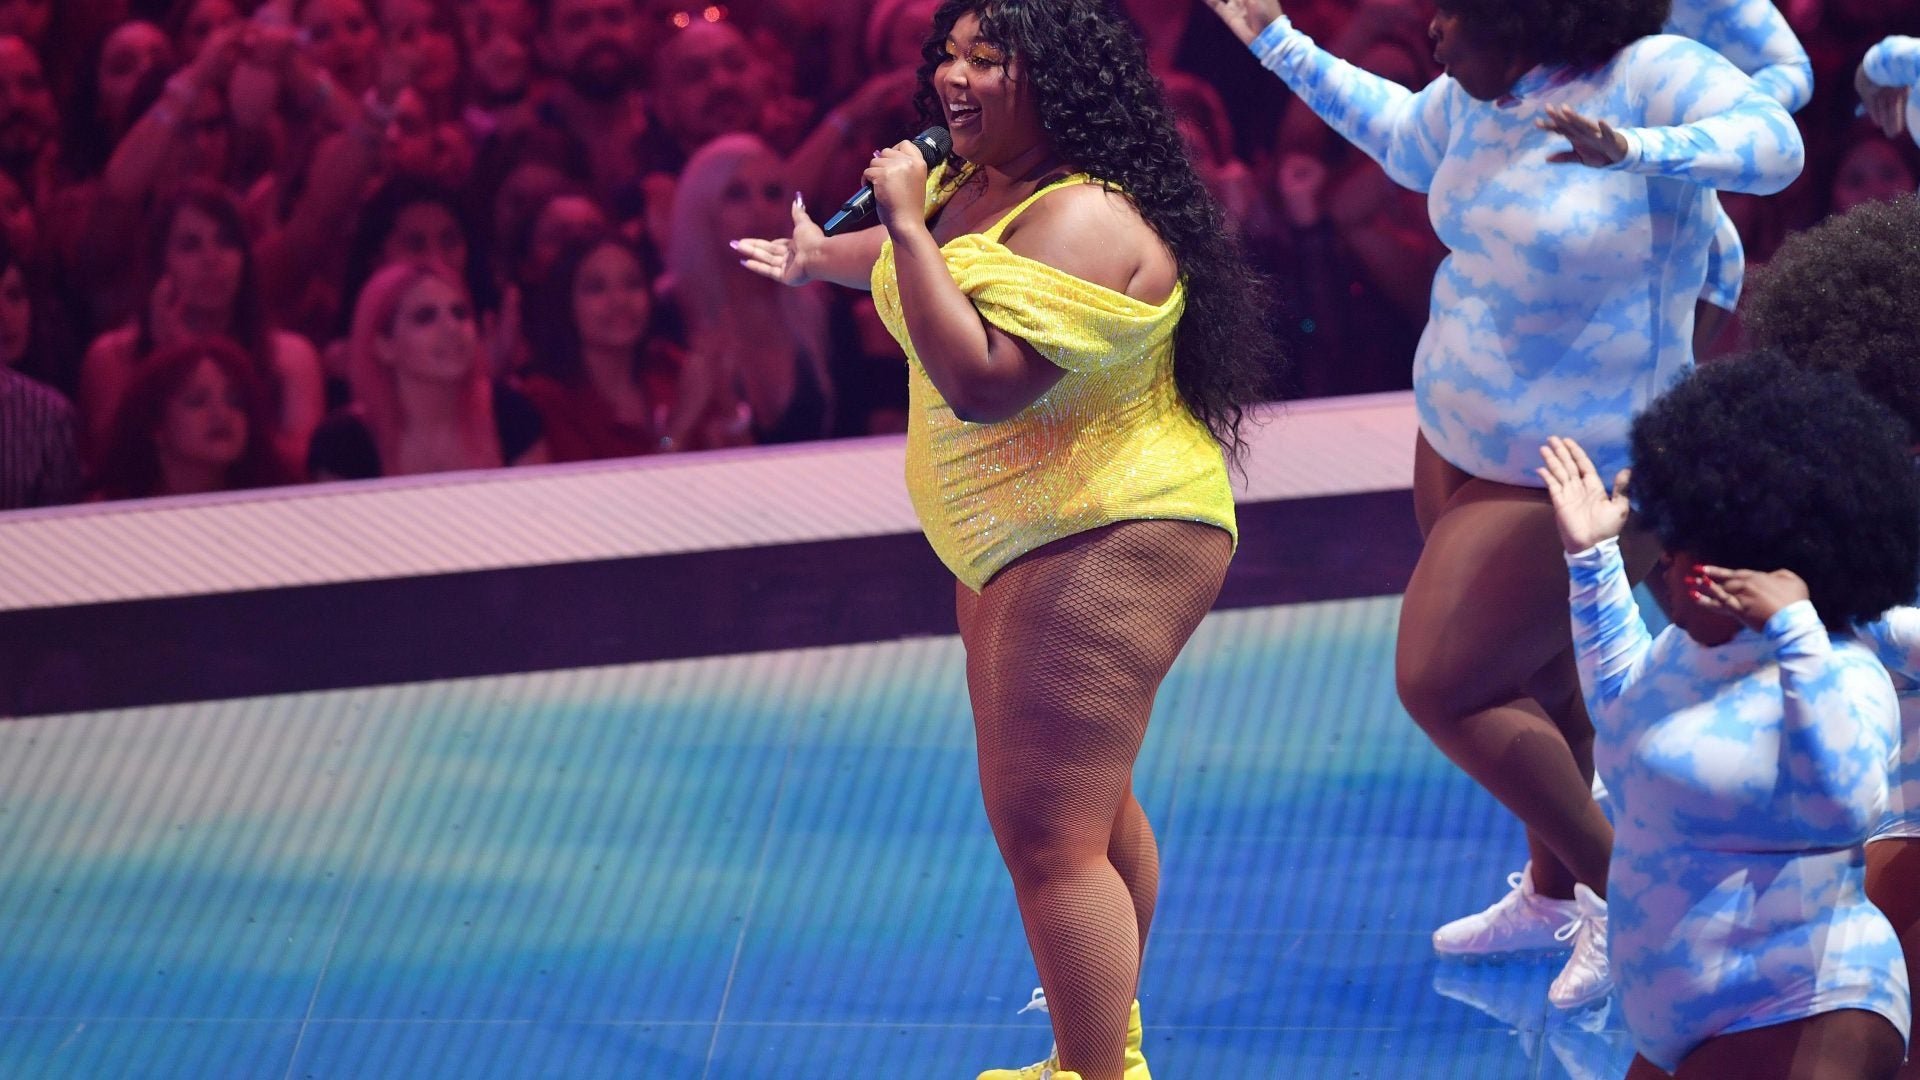 Lizzo Receives Major Love From Rihanna After She Stole The Show At The VMAs